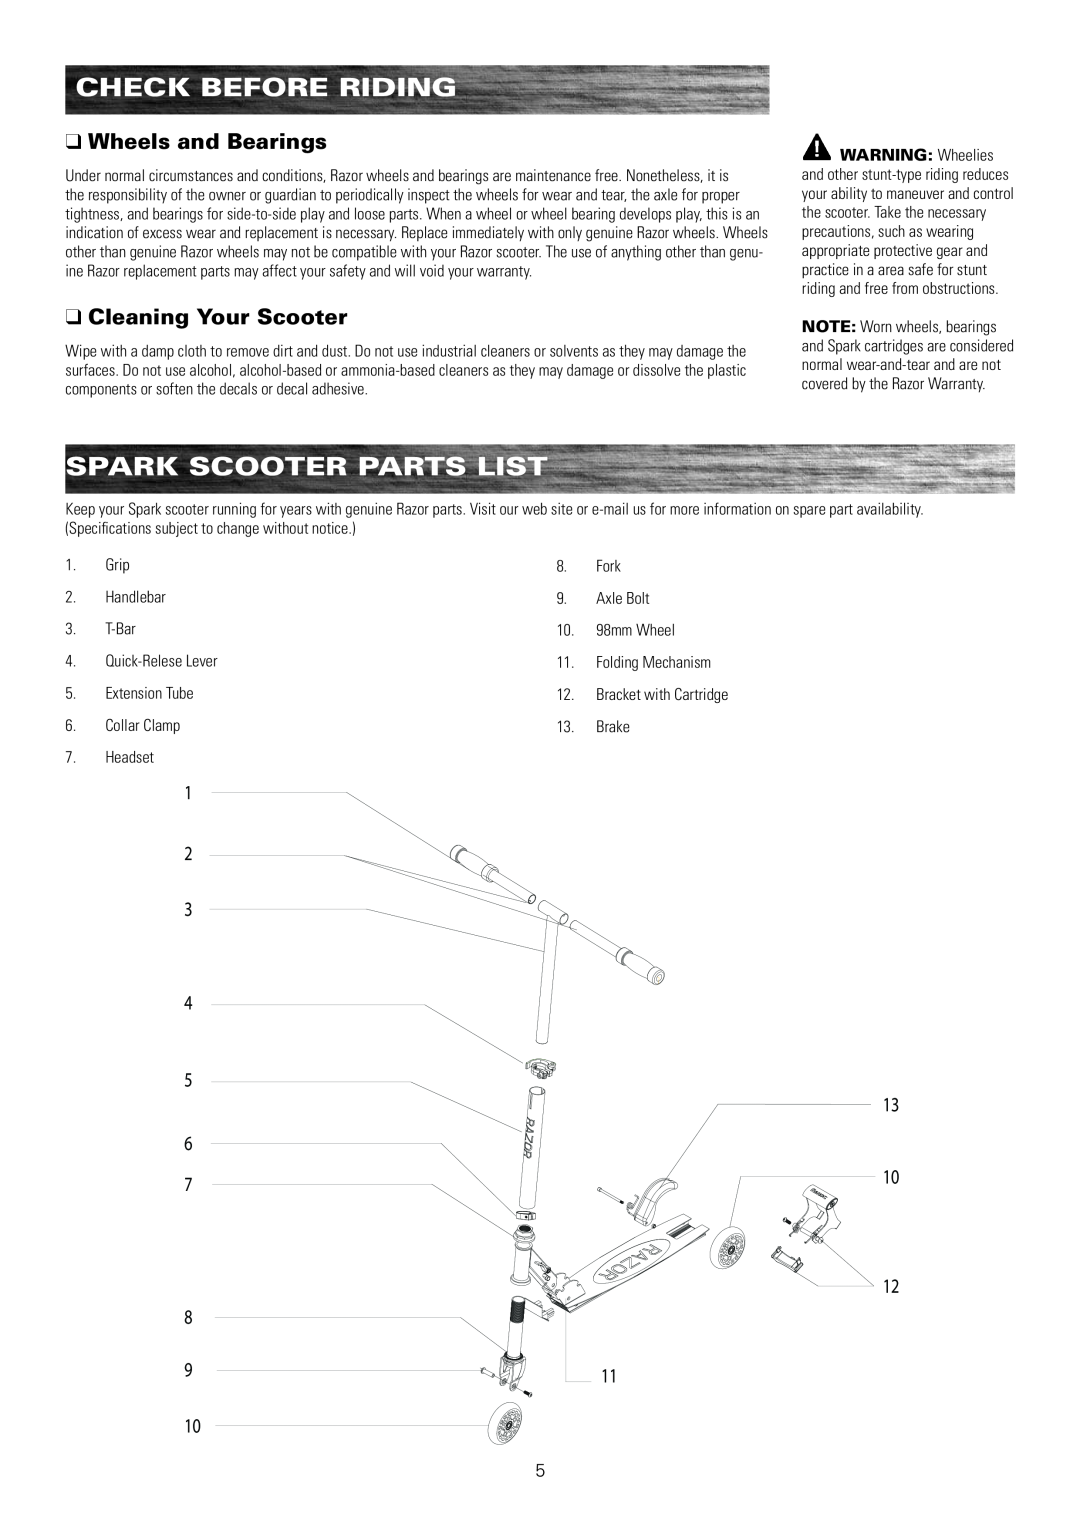 Razor 13010499, 13010461 Spark Scooter Parts List, q Wheels and Bearings, q Cleaning Your Scooter, Check before riding 